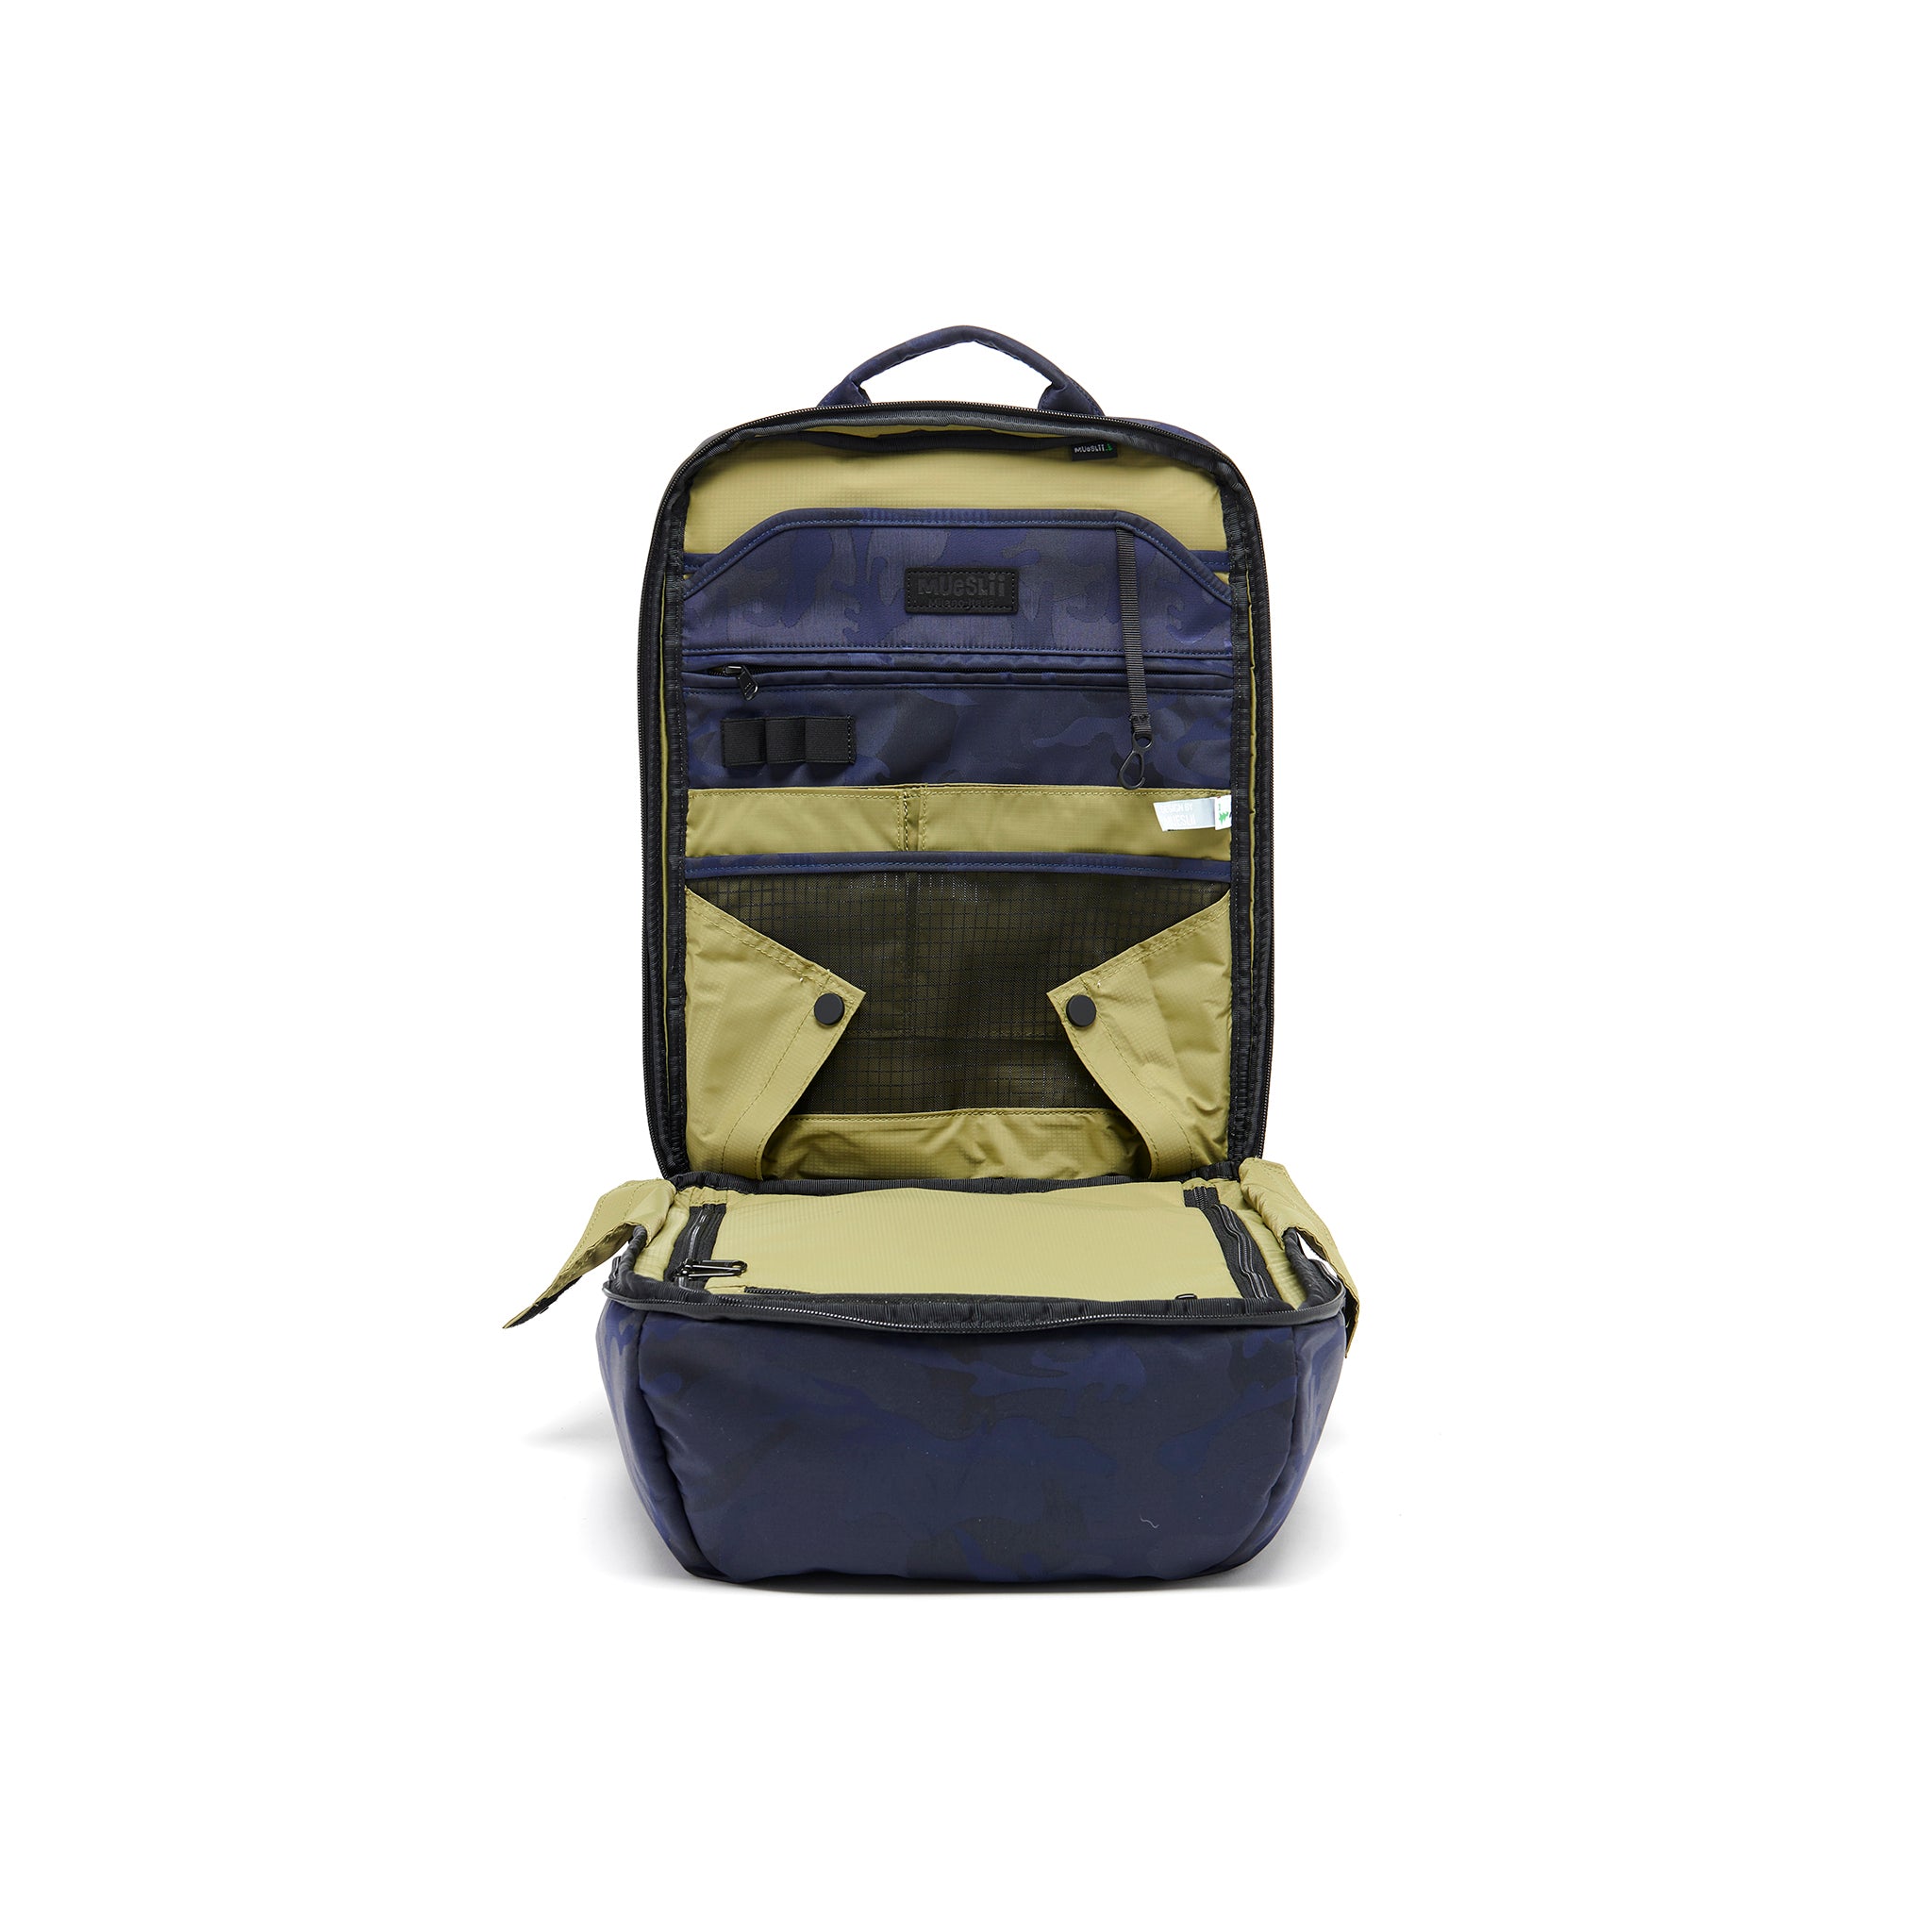 Mueslii travel backpack, made of waterproof jacquard nylon, camouflage pattern, with a laptop compartment, color blue, inside view.